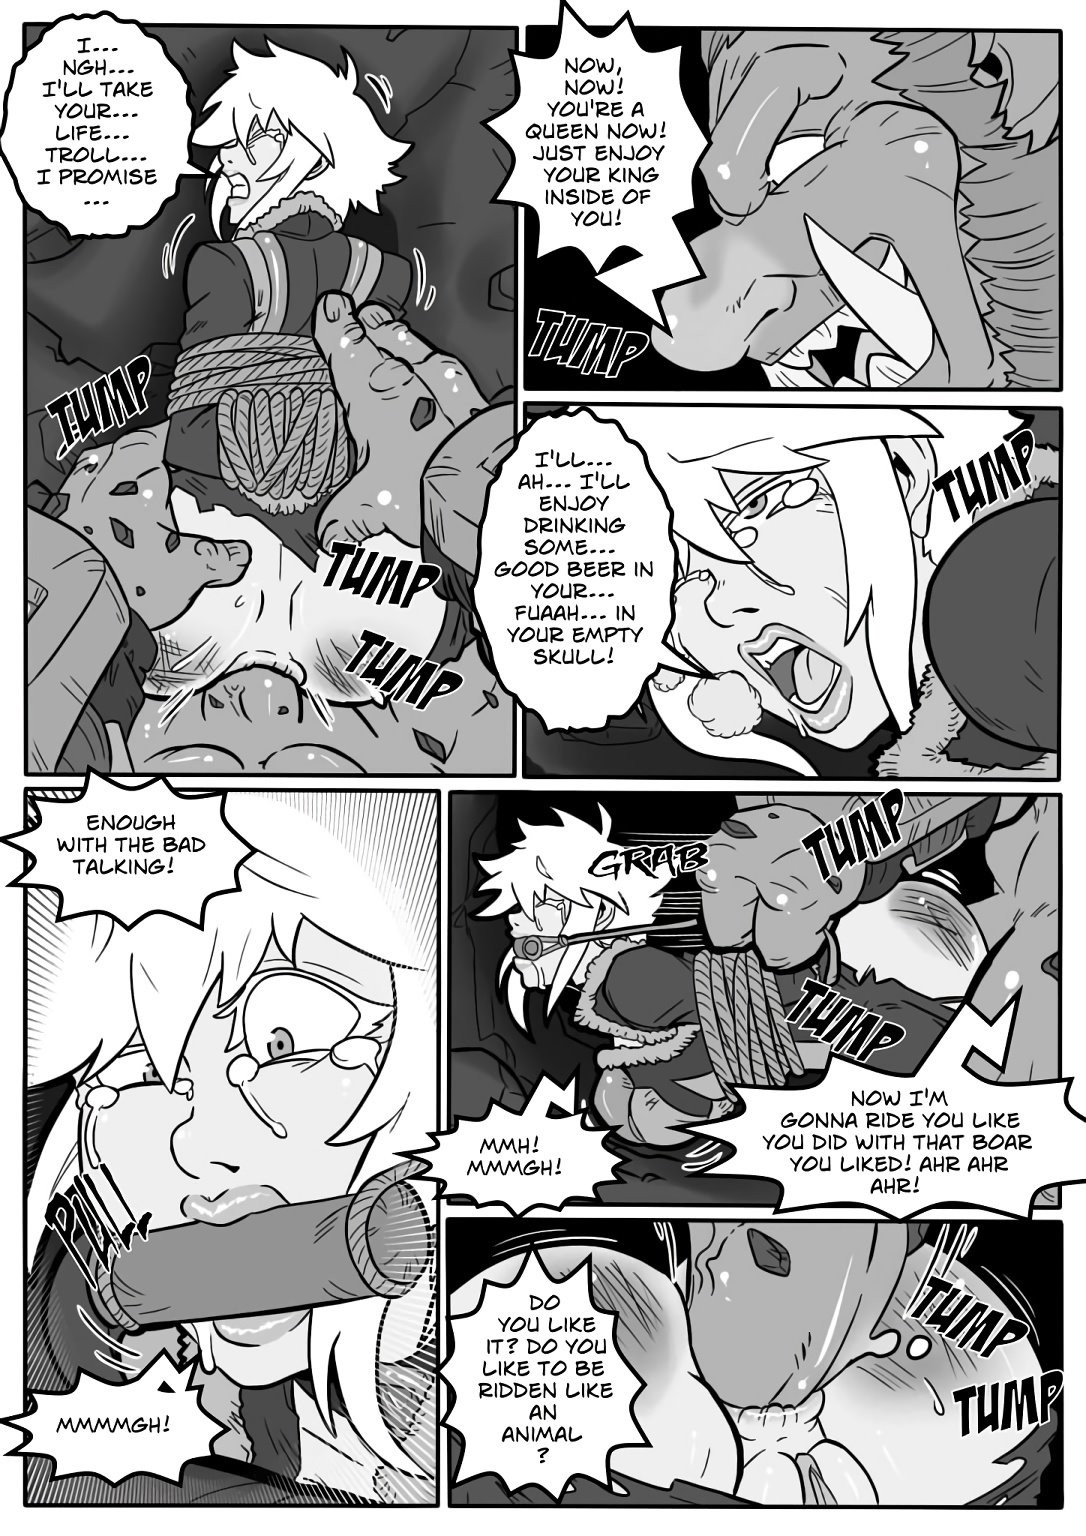 Tales of the Troll King 2 porn comic picture 11